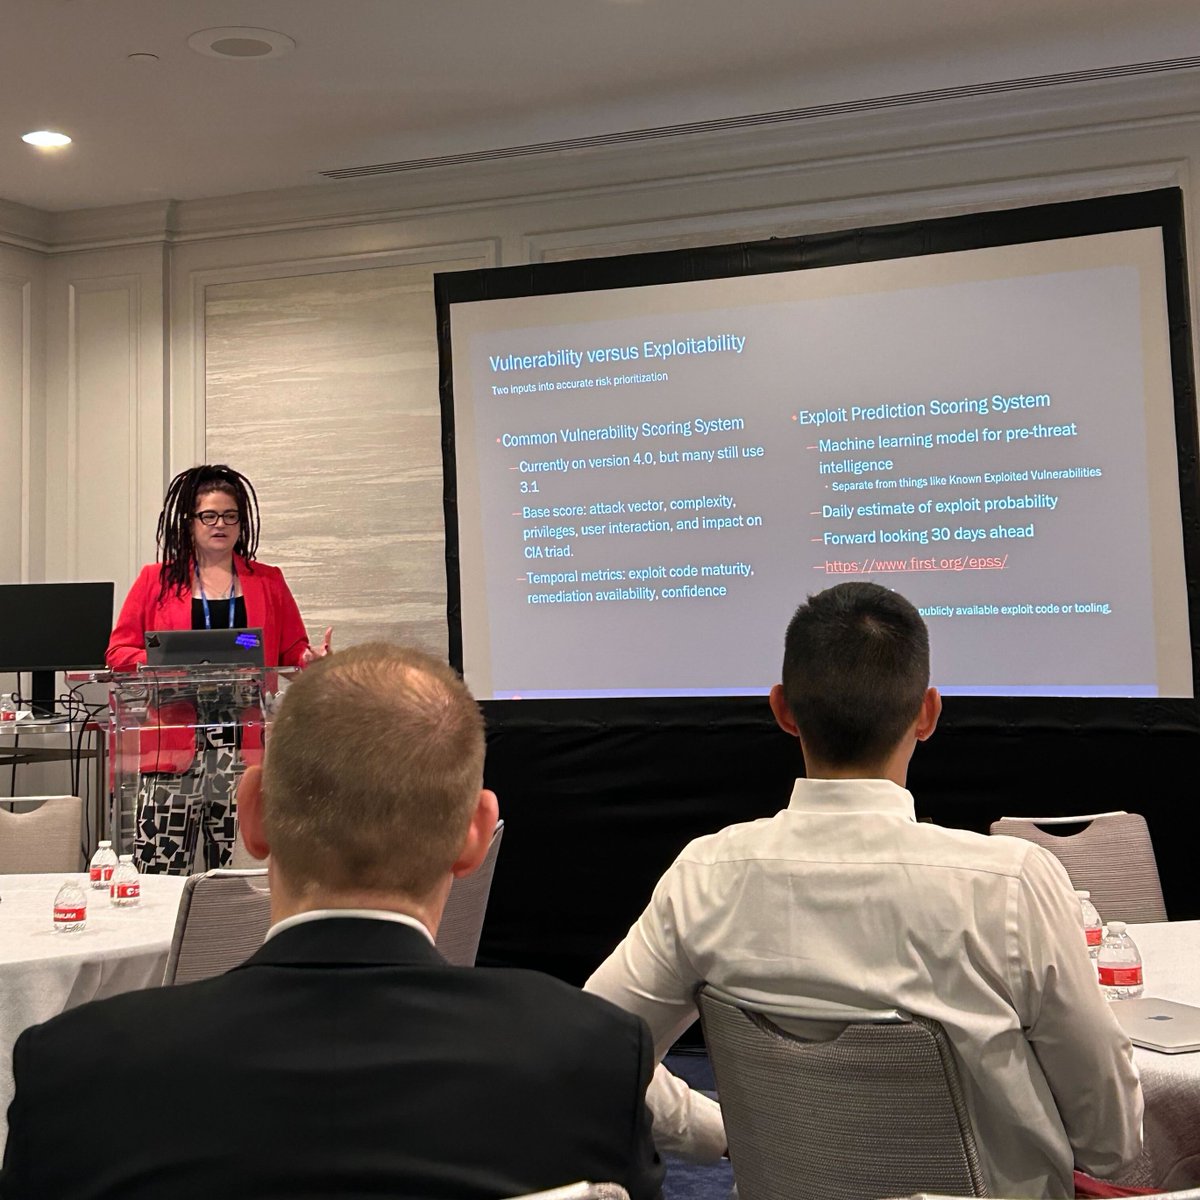 Thanks to everyone who joined our second Content Session at #RSAC! ❣️ Tanium’s Melissa Bischoping (@SecuritySphynx) shared how #TaniumGuardian can reduce risk by providing relevant, curated insights on actions to take.